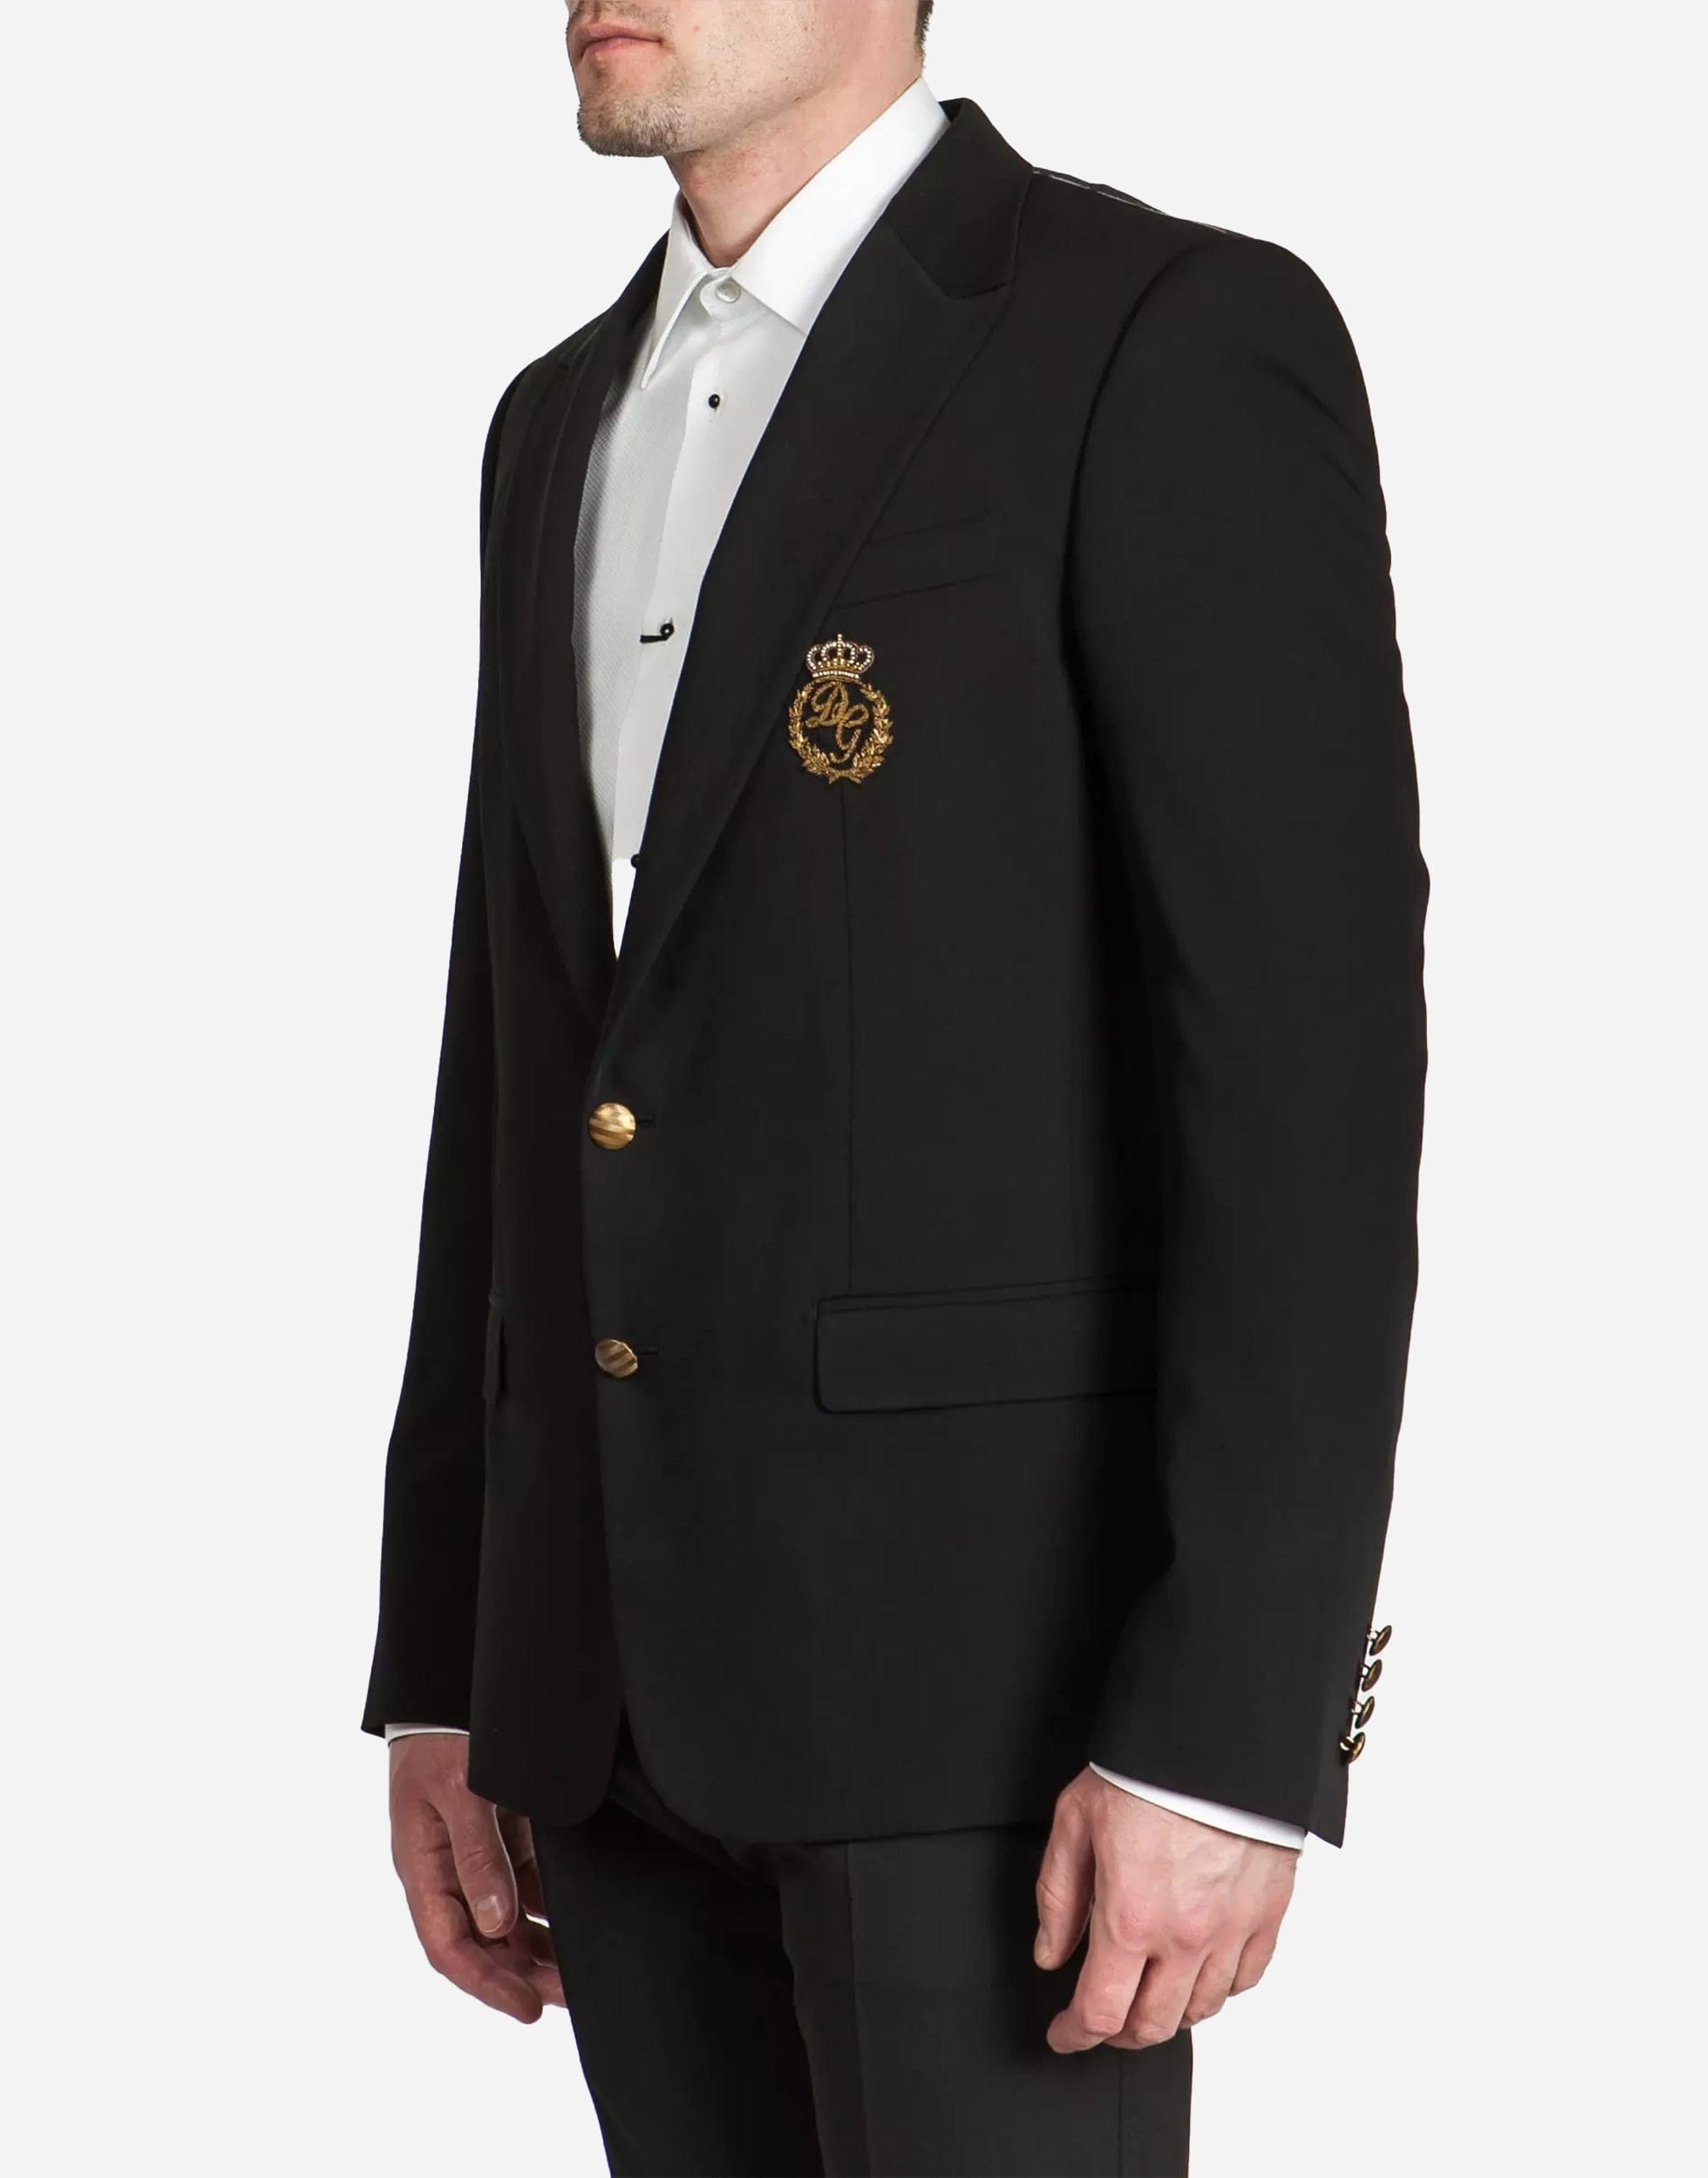 Dolce & Gabbana Wool Knit Jacket With Gold Buttons